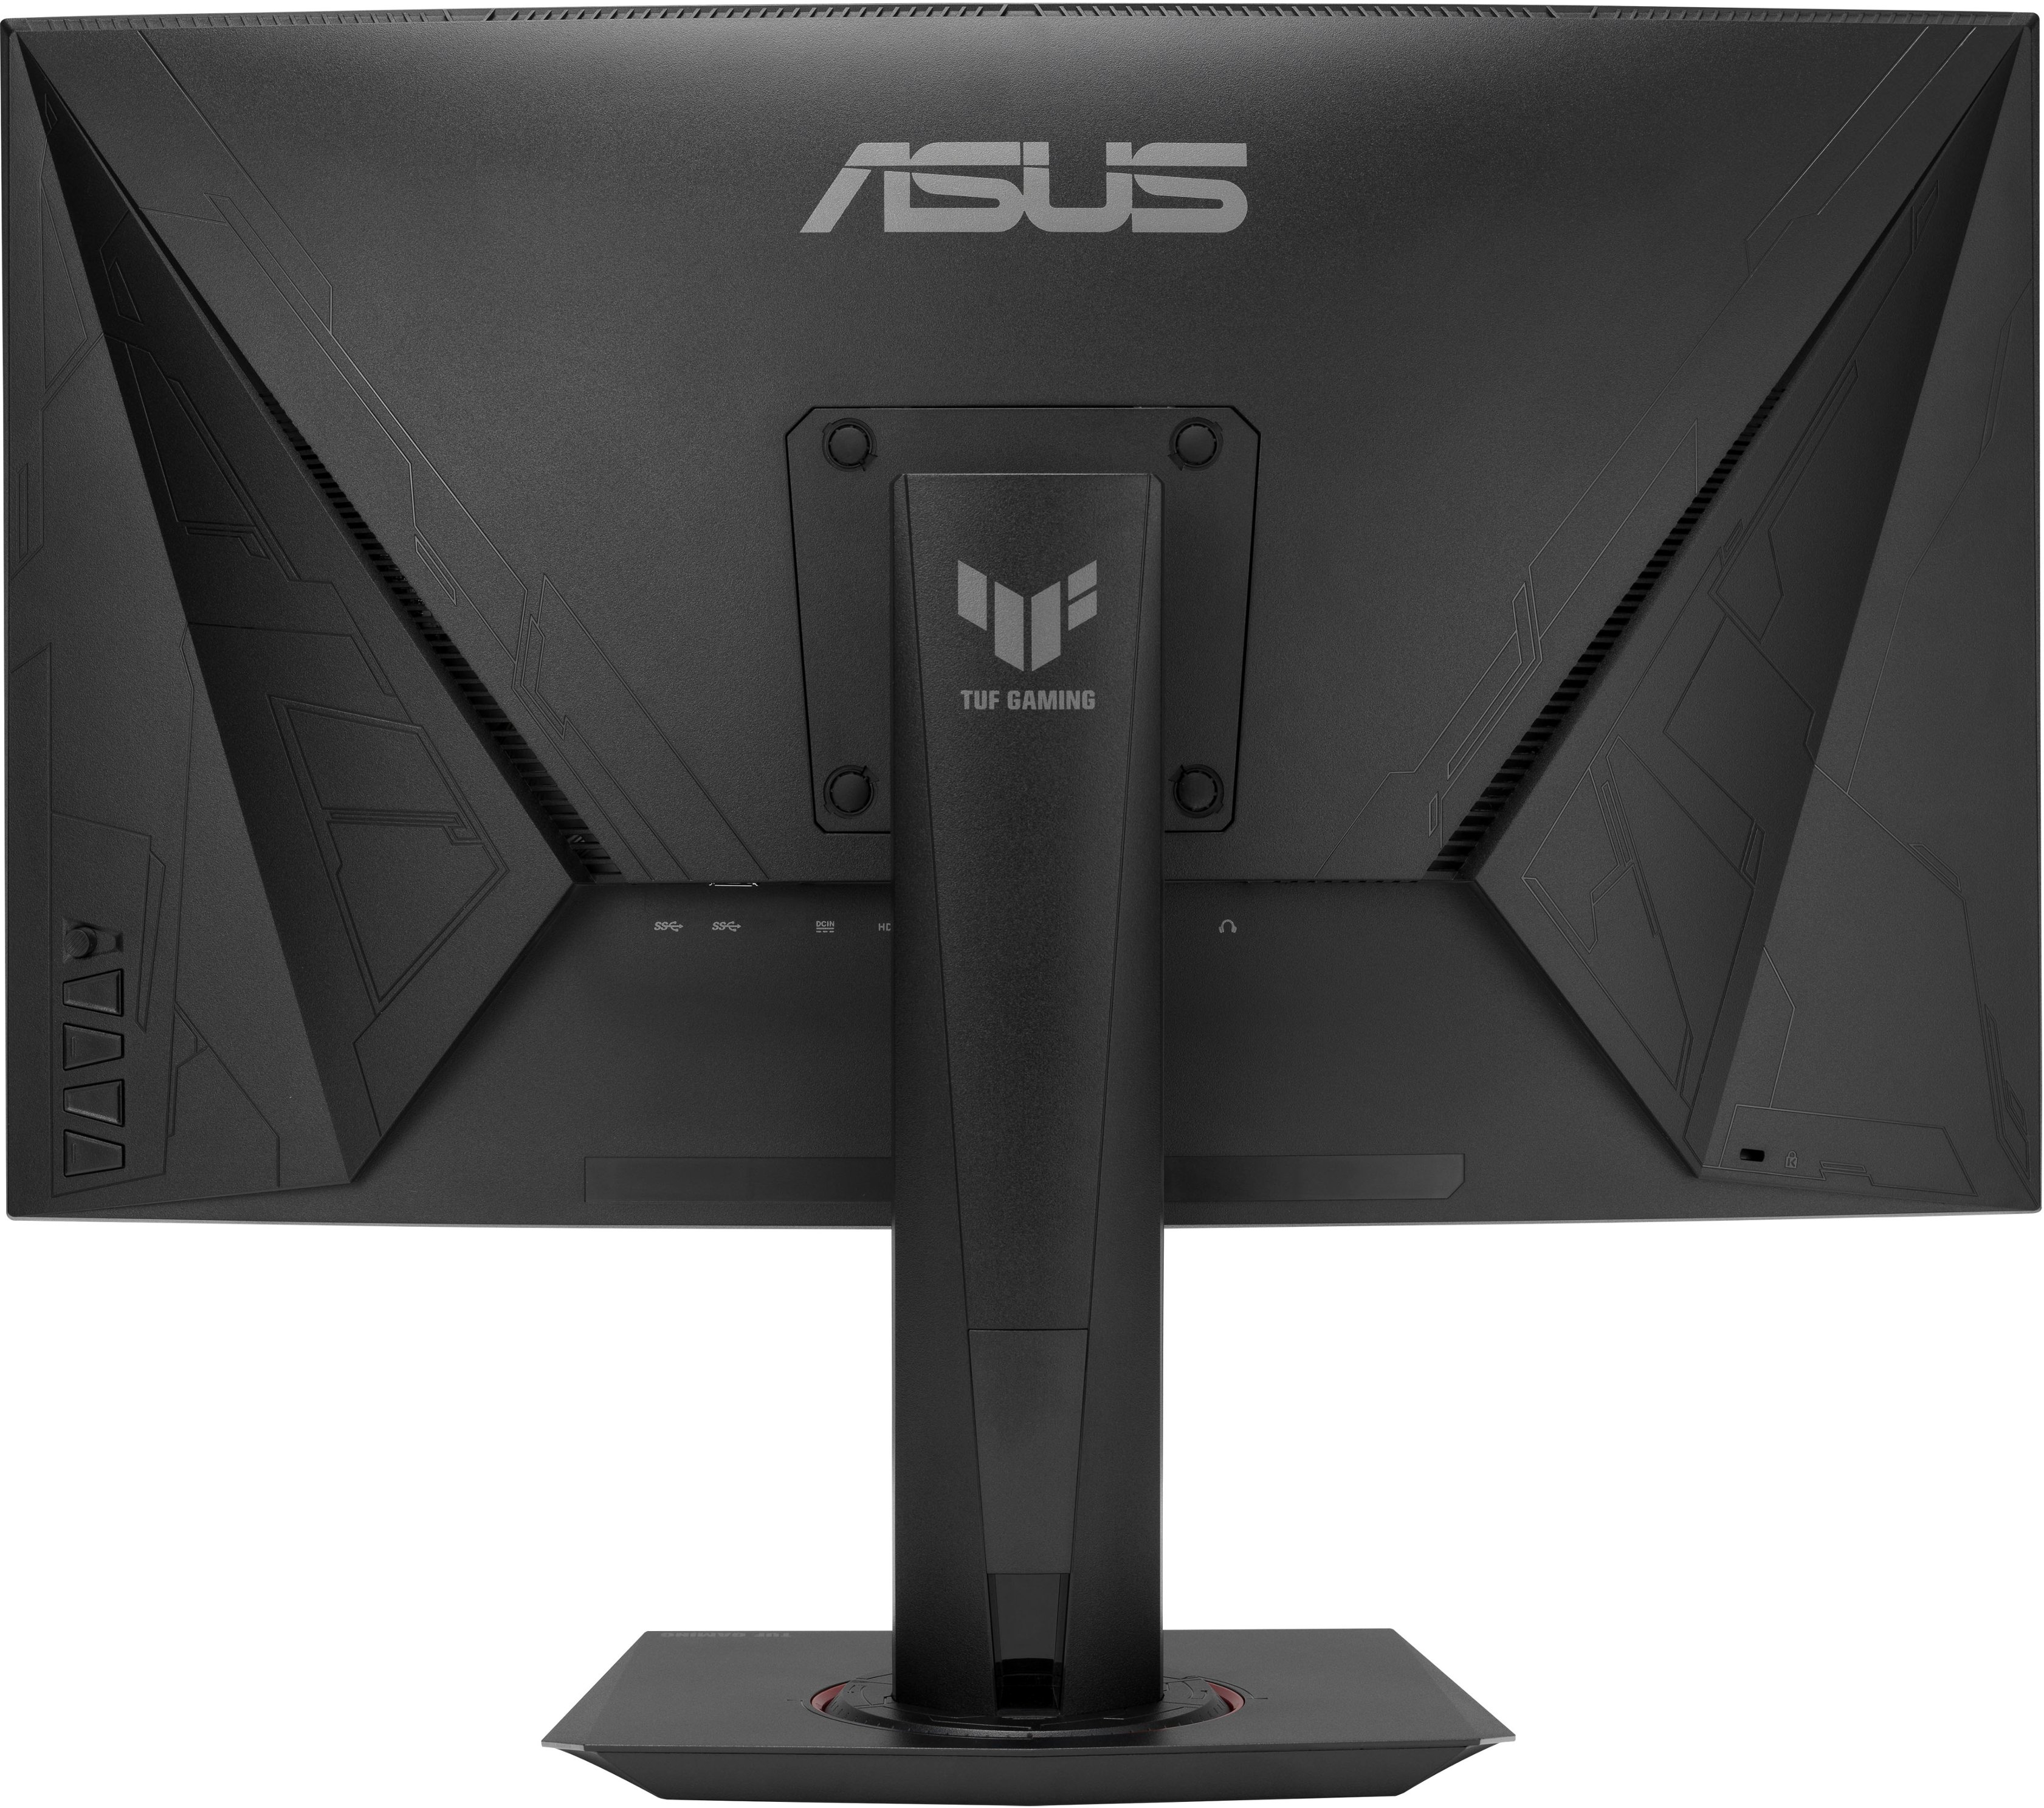 Back View: ASUS - TUF Gaming 27" Curved FHD 240Hz 1ms FreeSync Premium Gaming Monitor w/ HDR and Height Adjust (DisplayPort, HDMI) - Black